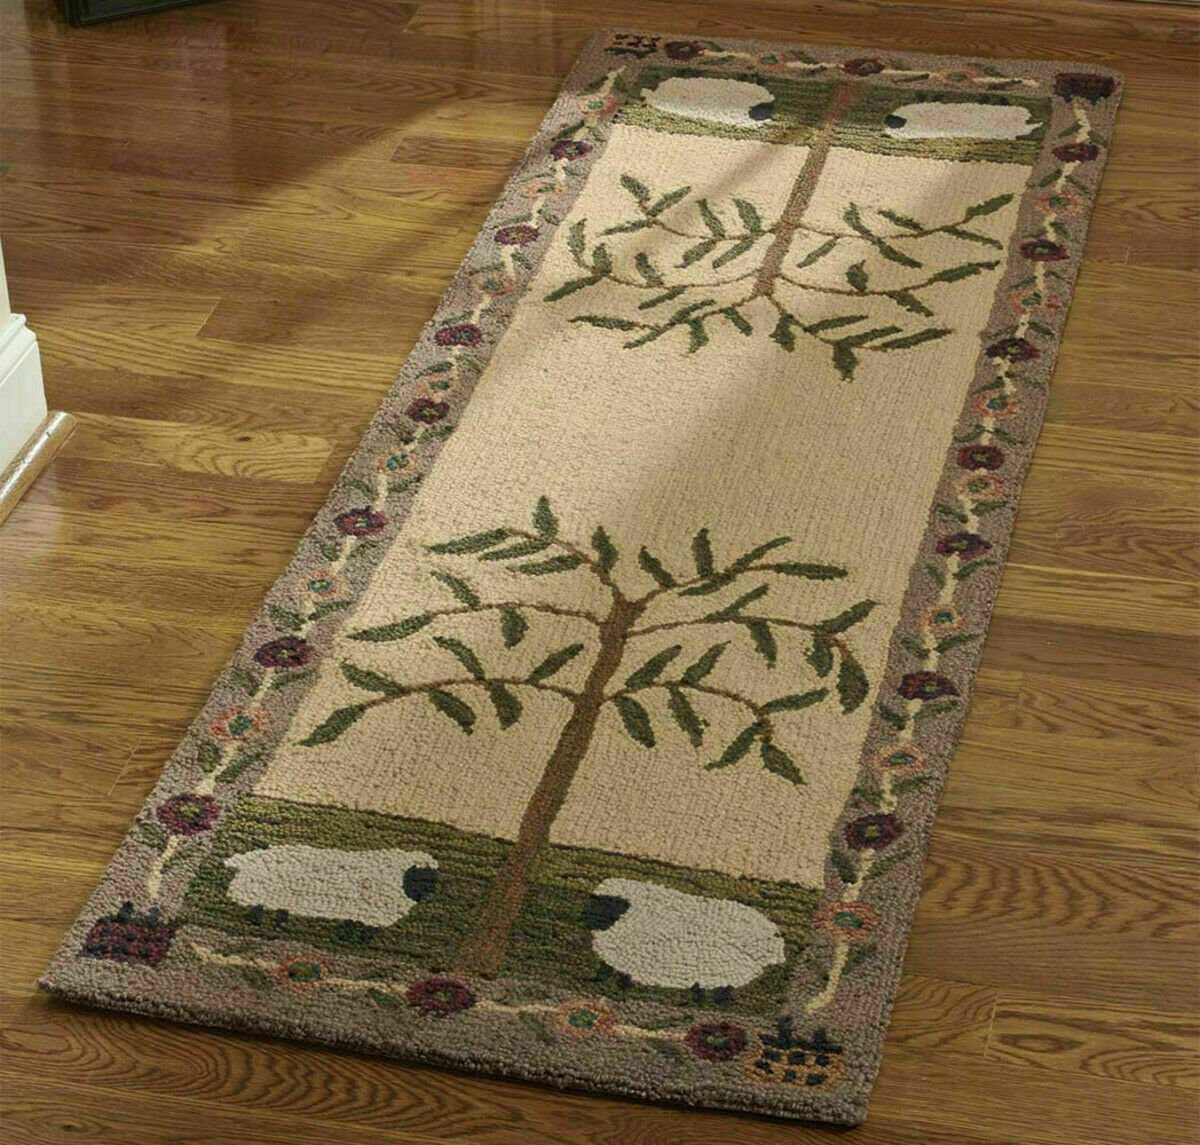 Primitive Willow &amp; Sheep Hooked Rug Runner Hand-Crafted - 2&